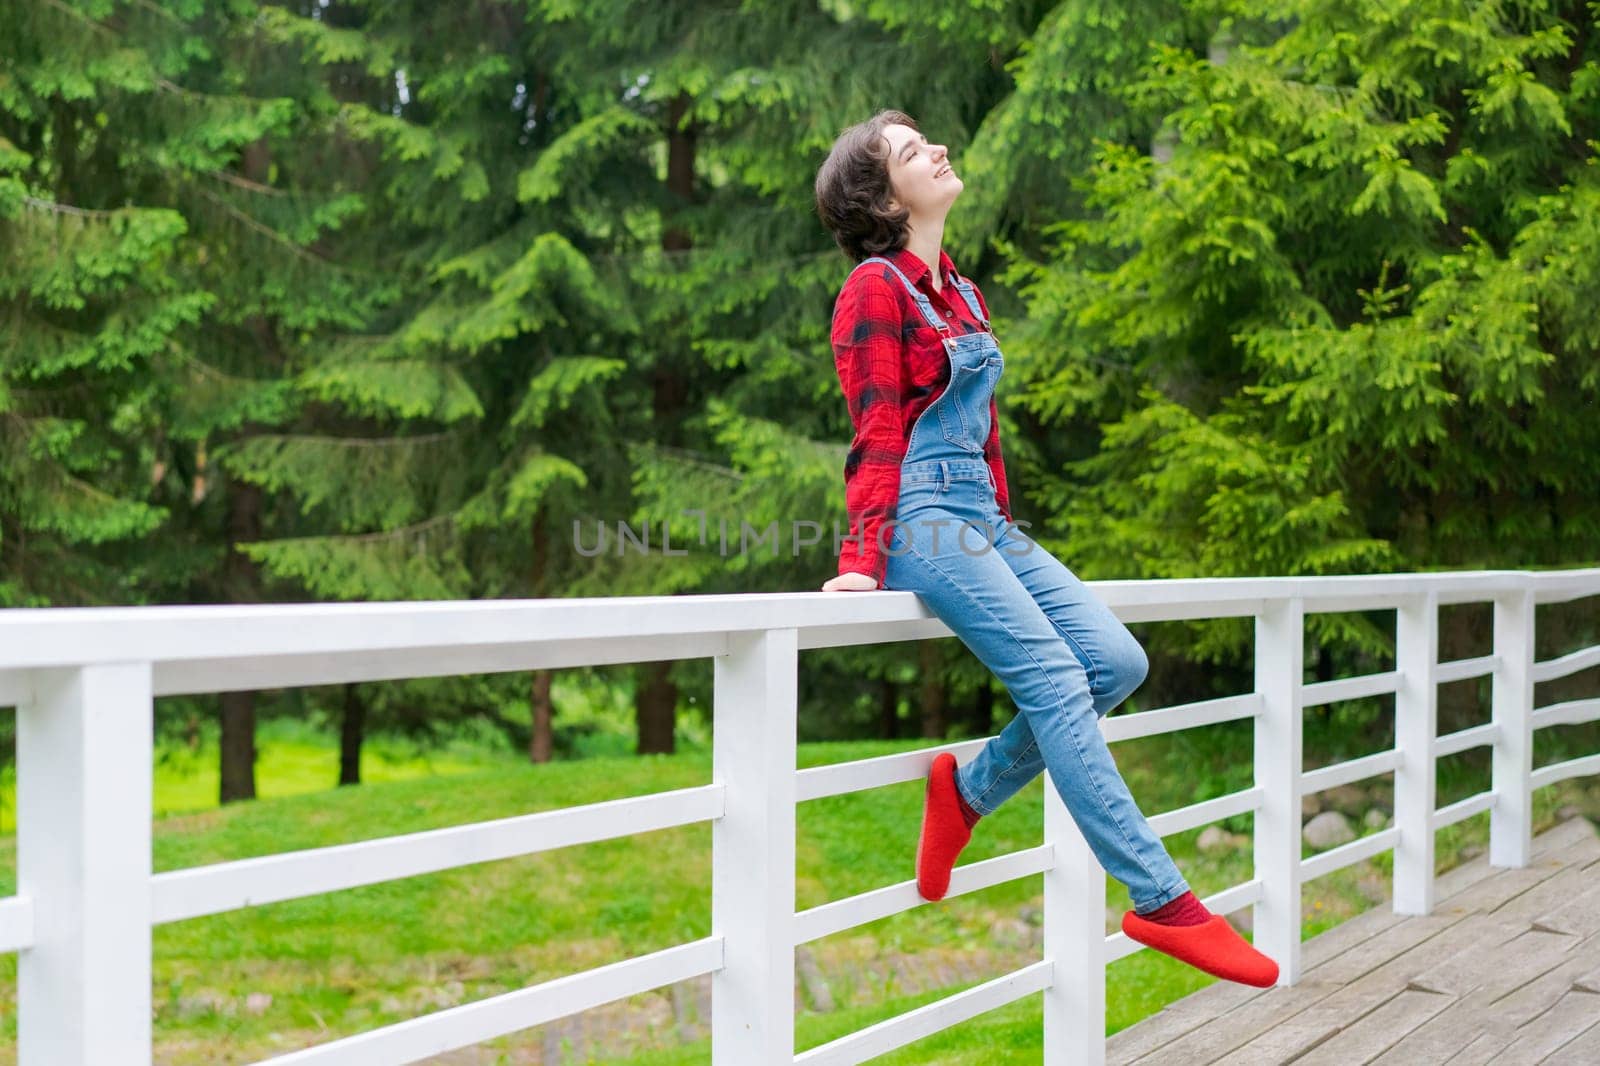 Happy young woman in blue denim overalls and red shirt sits on wooden fence on the terrace in the backyard, against the backdrop of a green lawn and forest on a sunny day